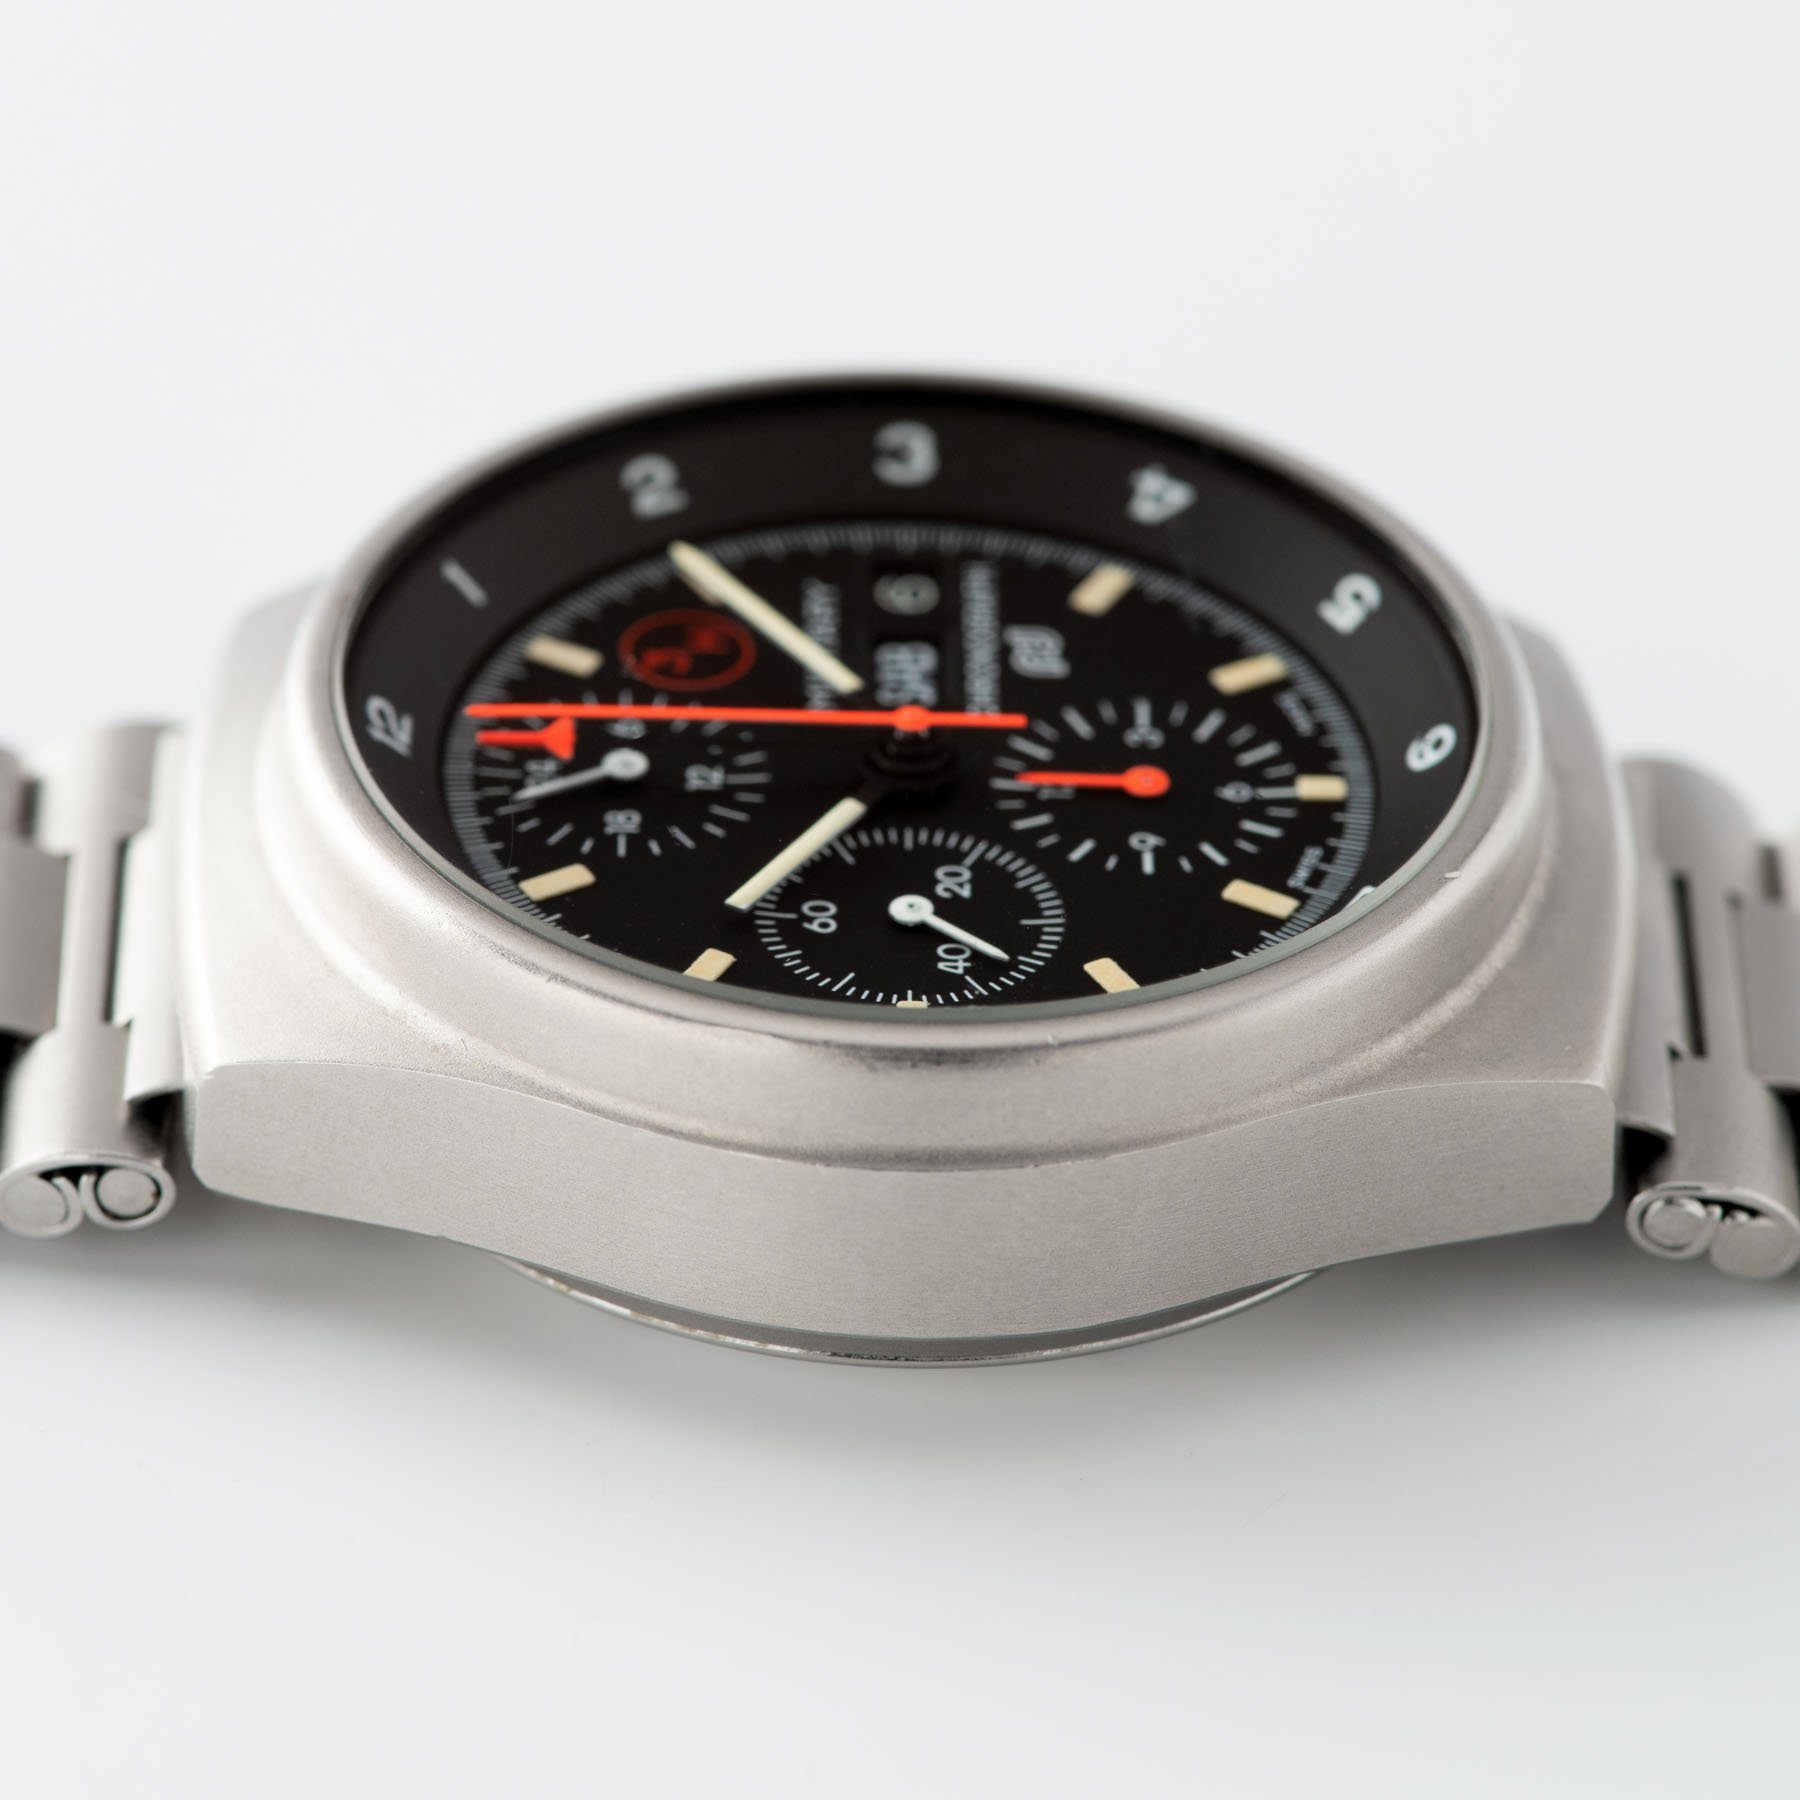 Porsche Design by Orfina Chronograph Matte Finish Reference 7177 with matte finish